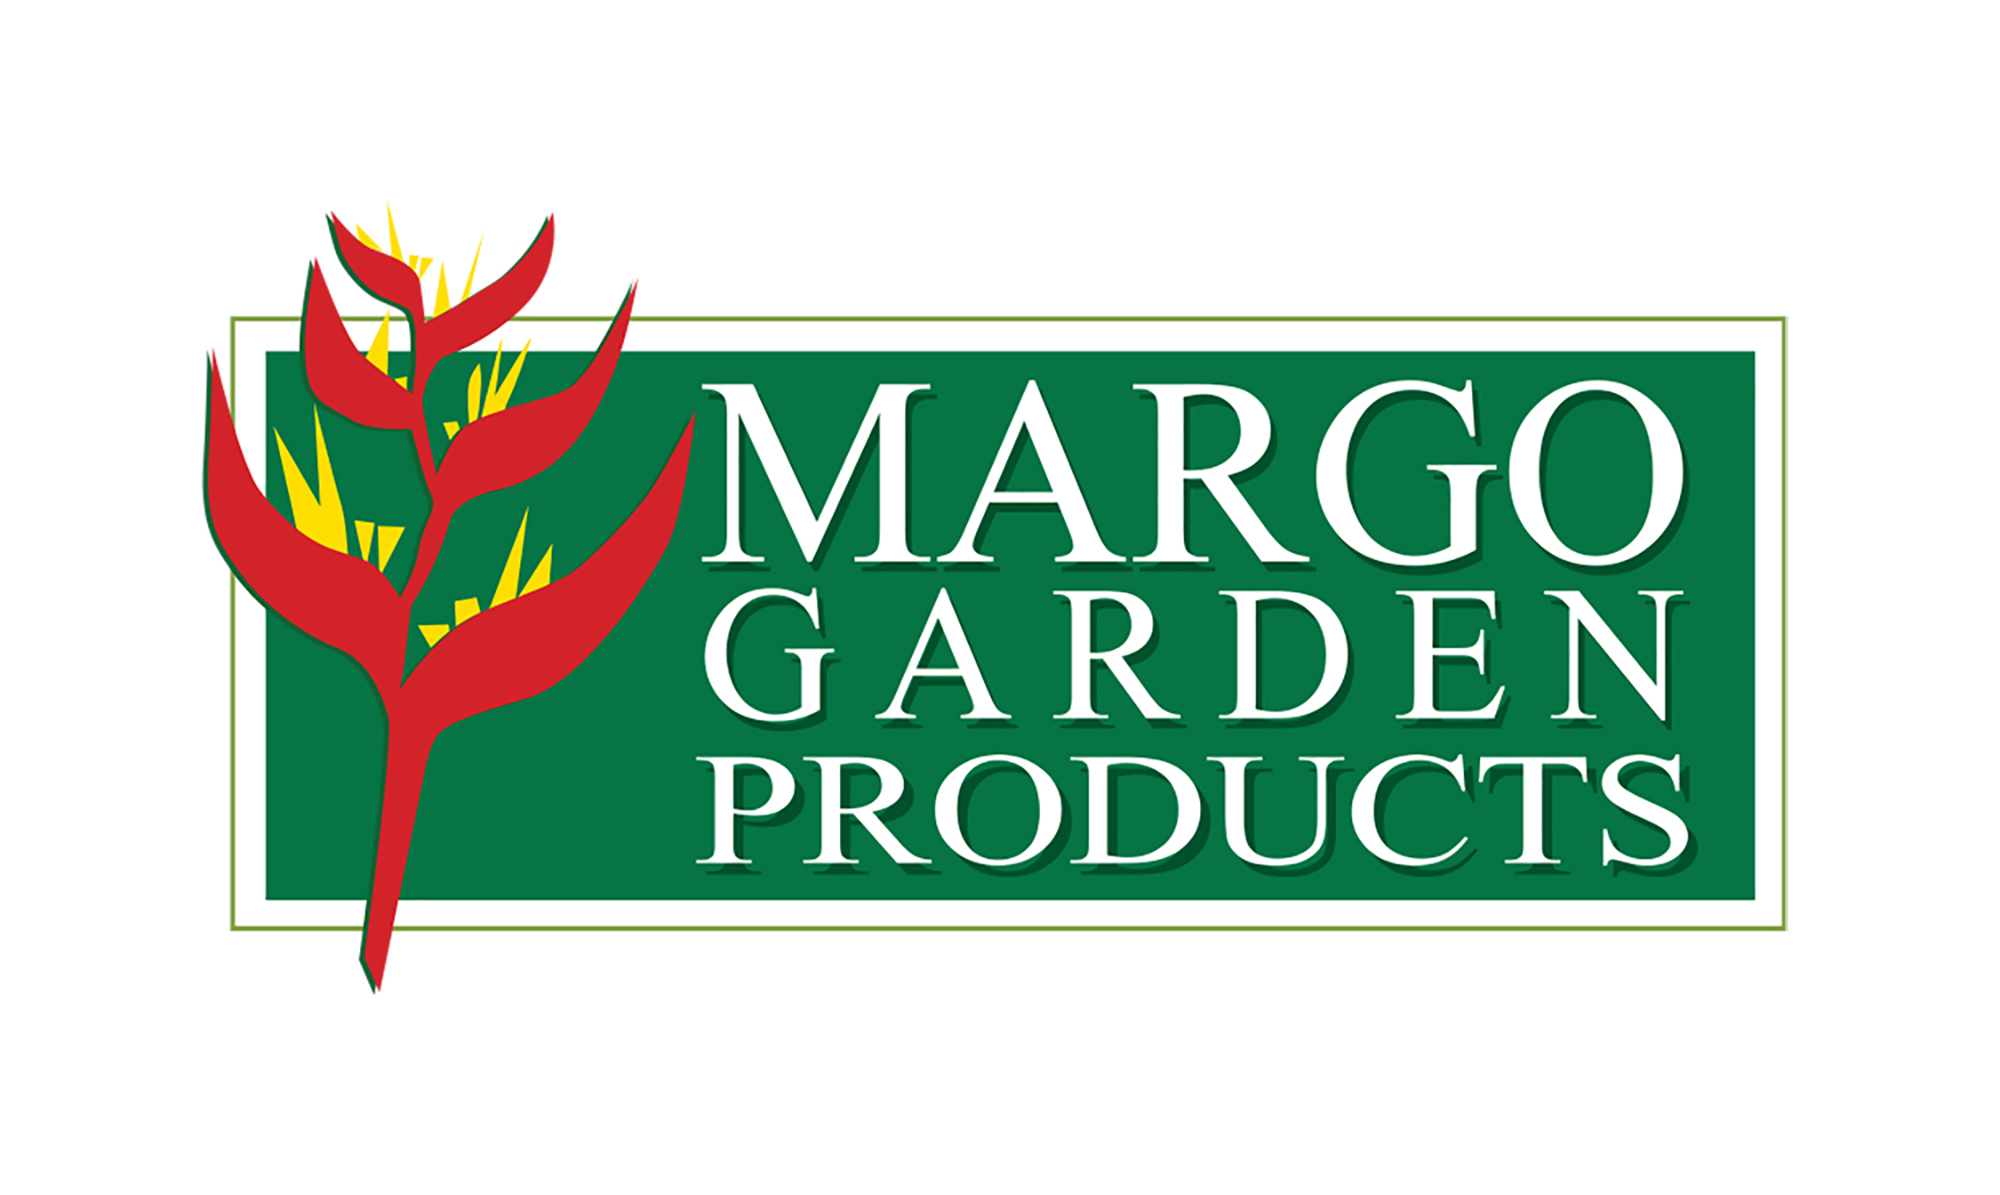 The logo for Margo Garden Products